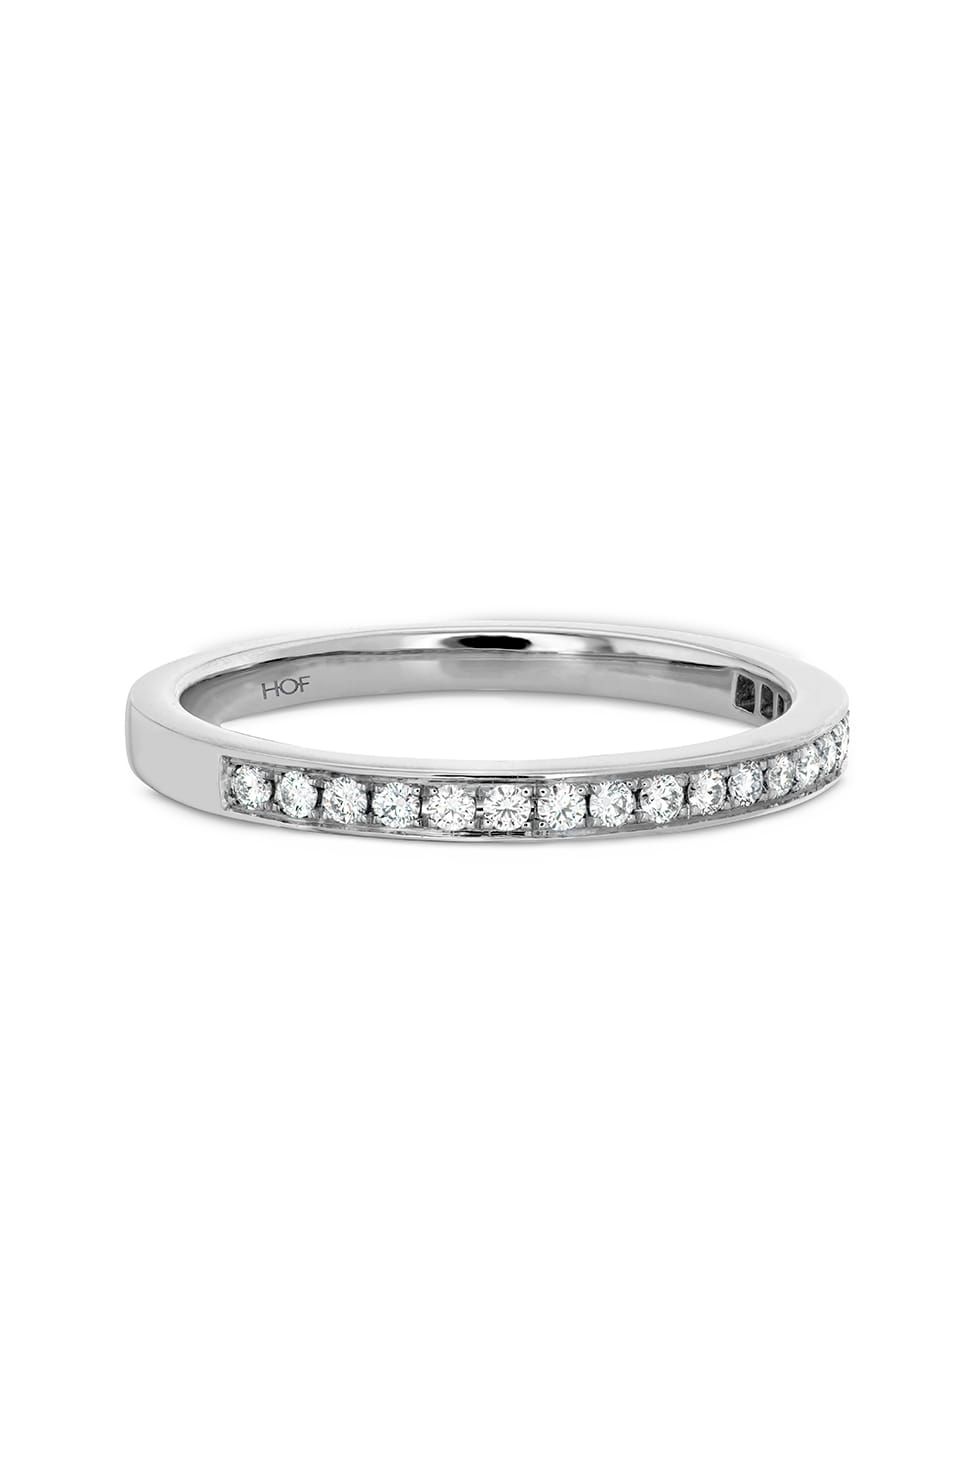 Illustrious Diamond Band From Hearts On Fire available at LeGassick Diamonds and Jewellery Gold Coast, Australia.